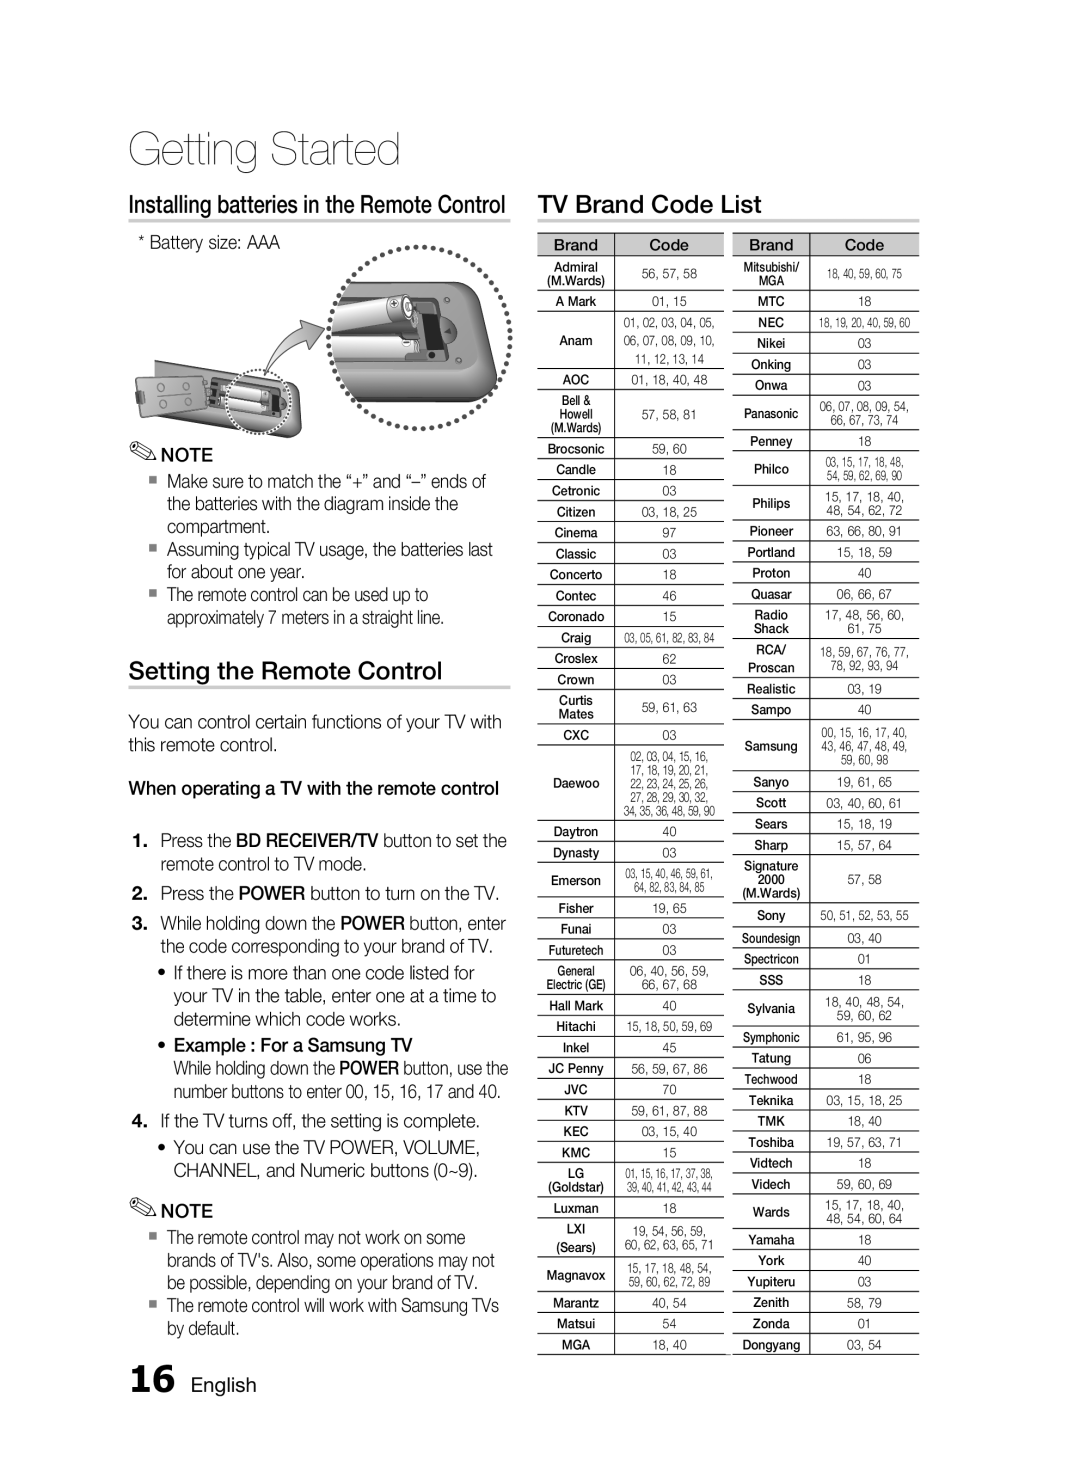 Samsung HT-C5200 TV Brand Code List, Setting the Remote Control, Installing batteries in the Remote Control, English 